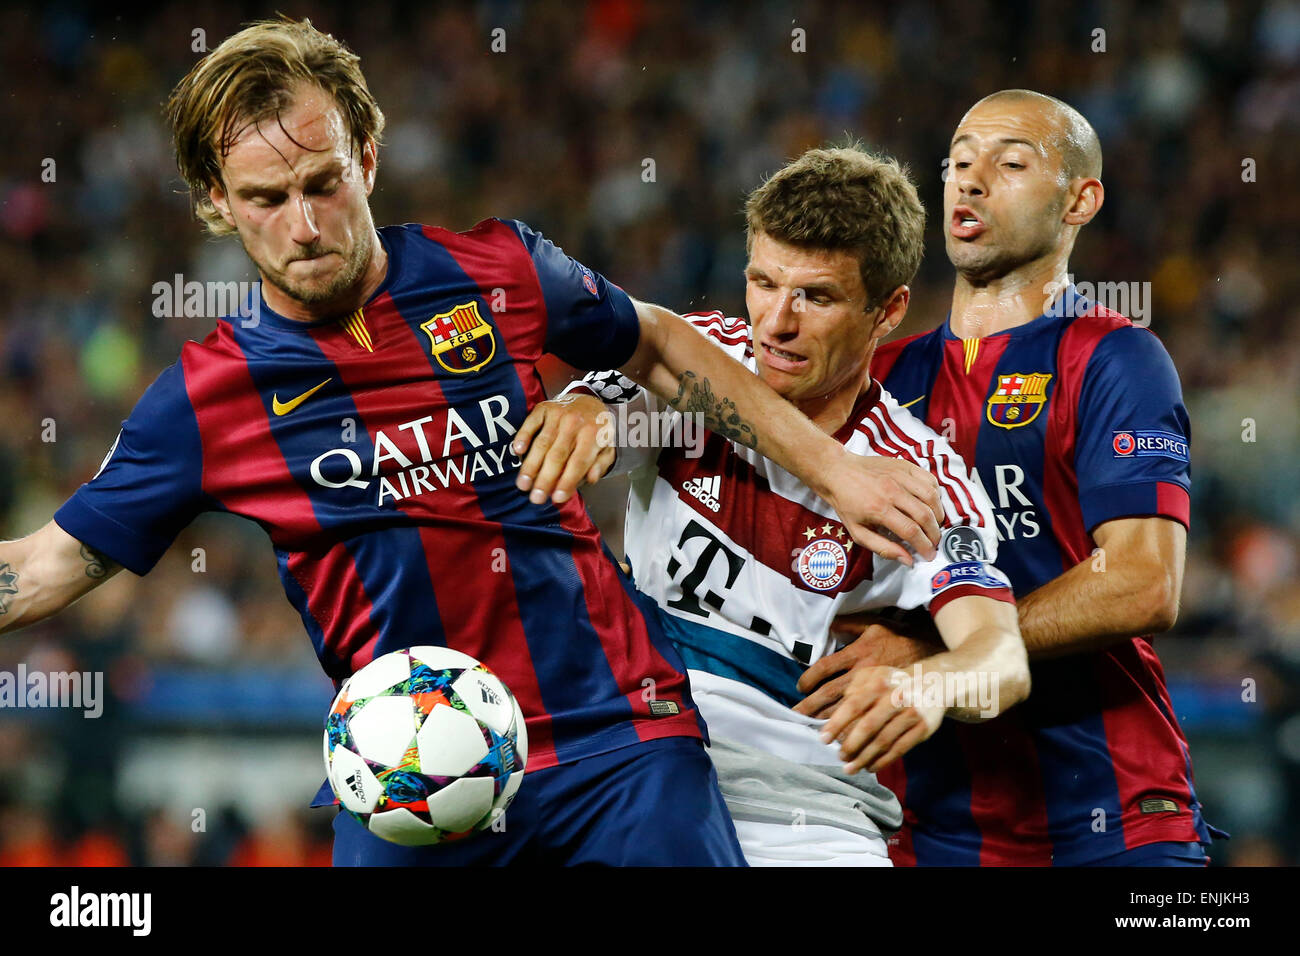 Barcelona, Spain. 6th May, 2015. Barcelona's Croatian midfielder Ivan Rakitic (L) and Argentine defender Javier Mascherano (R) vie with FC Bayern Munich's German forward Thomas Muller during their first round match of semifinal at the 2014-2015 UEFA Champions League at Camp Nou Stadium in Barcelona, Spain, May 6, 2015. Barcelona won 3-0. Credit:  Pau Barrena/Xinhua/Alamy Live News Stock Photo